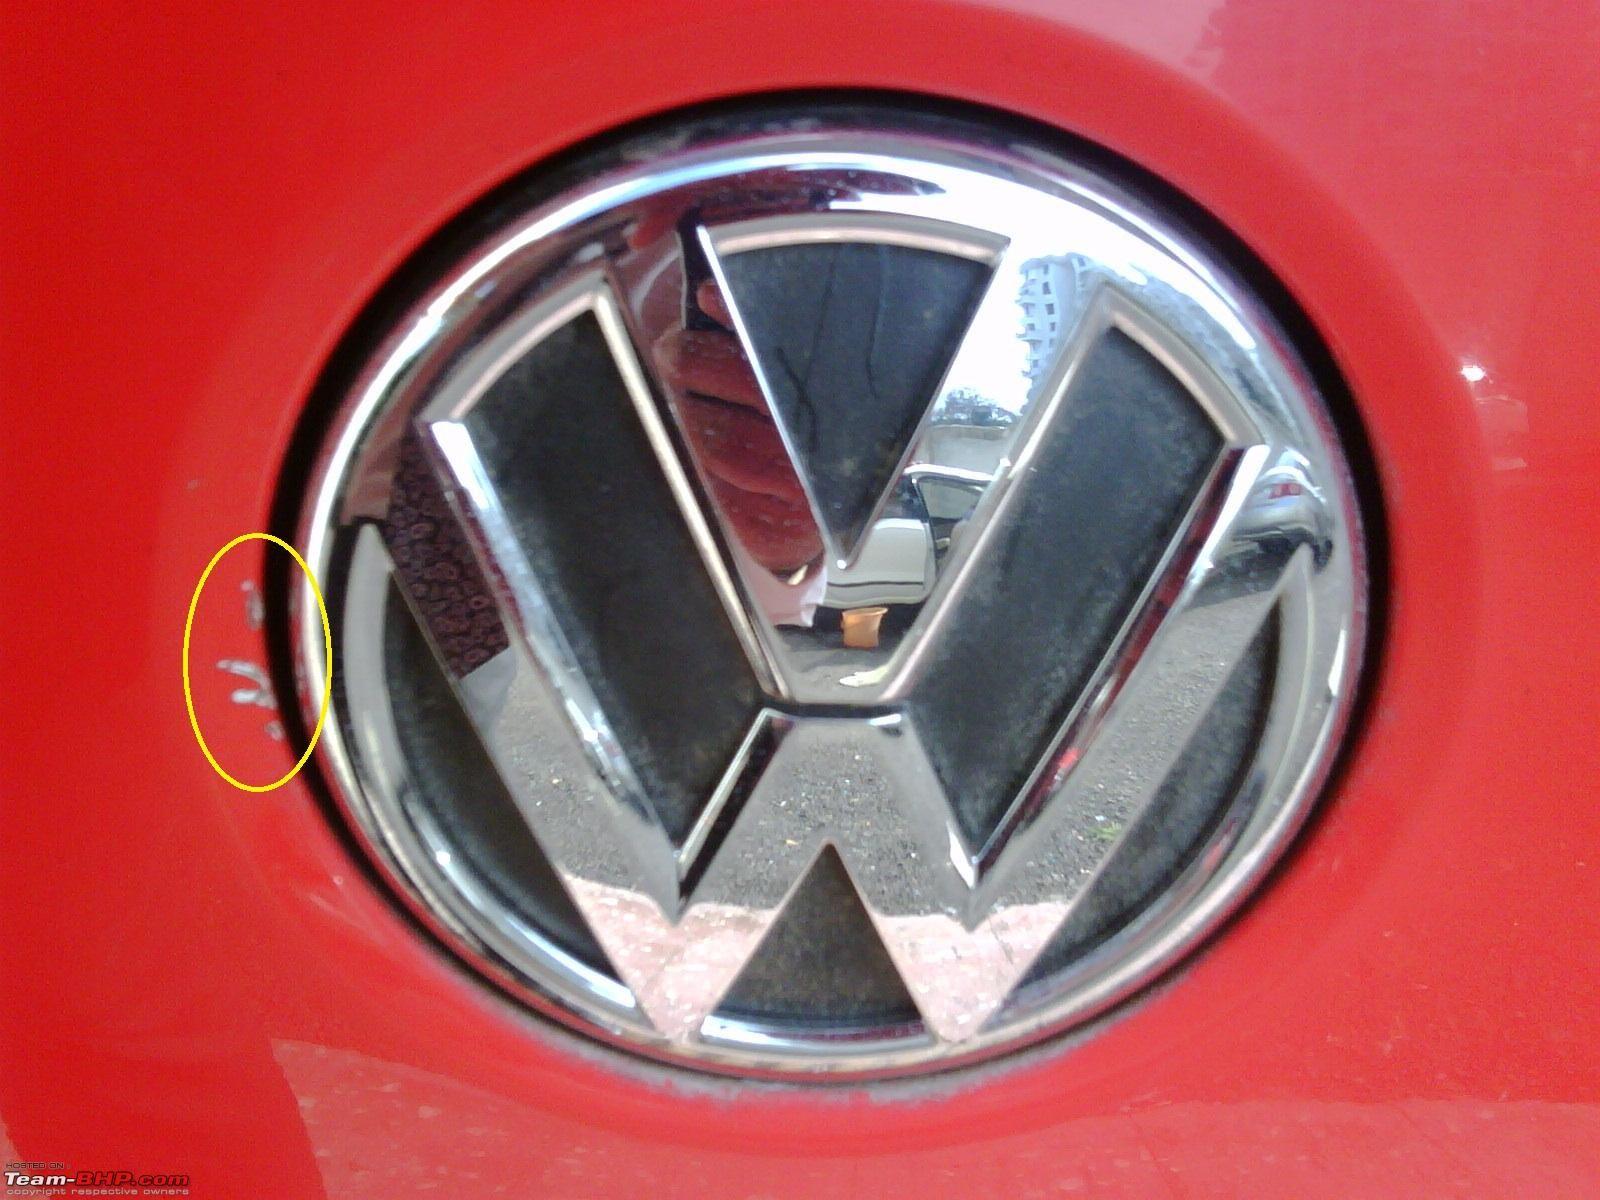 Indian Red Car Logo - Car logo theft / monograms stolen in India - Page 37 - Team-BHP